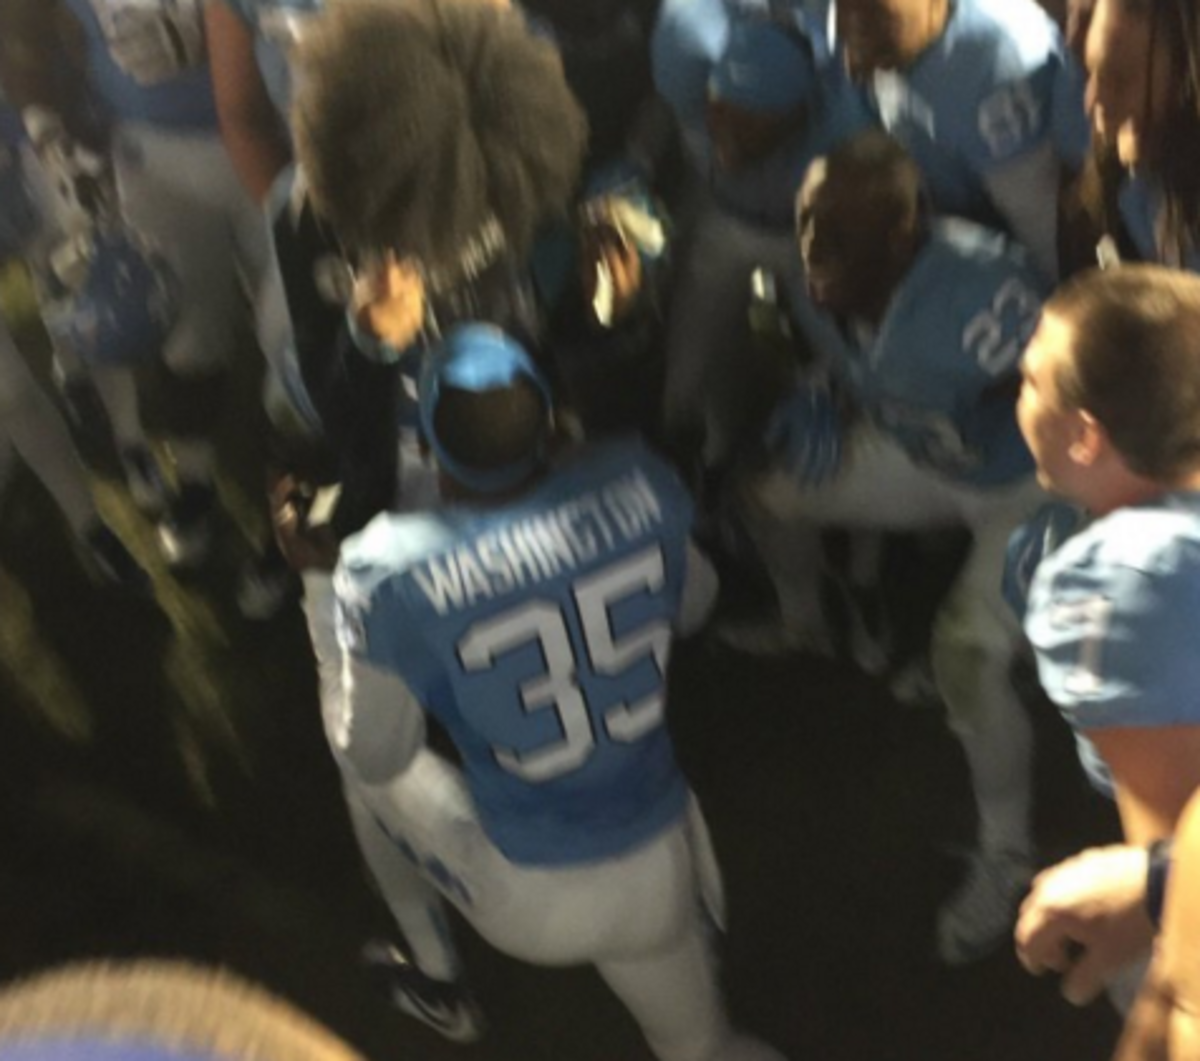 A UNC player proposes to his girlfriend.